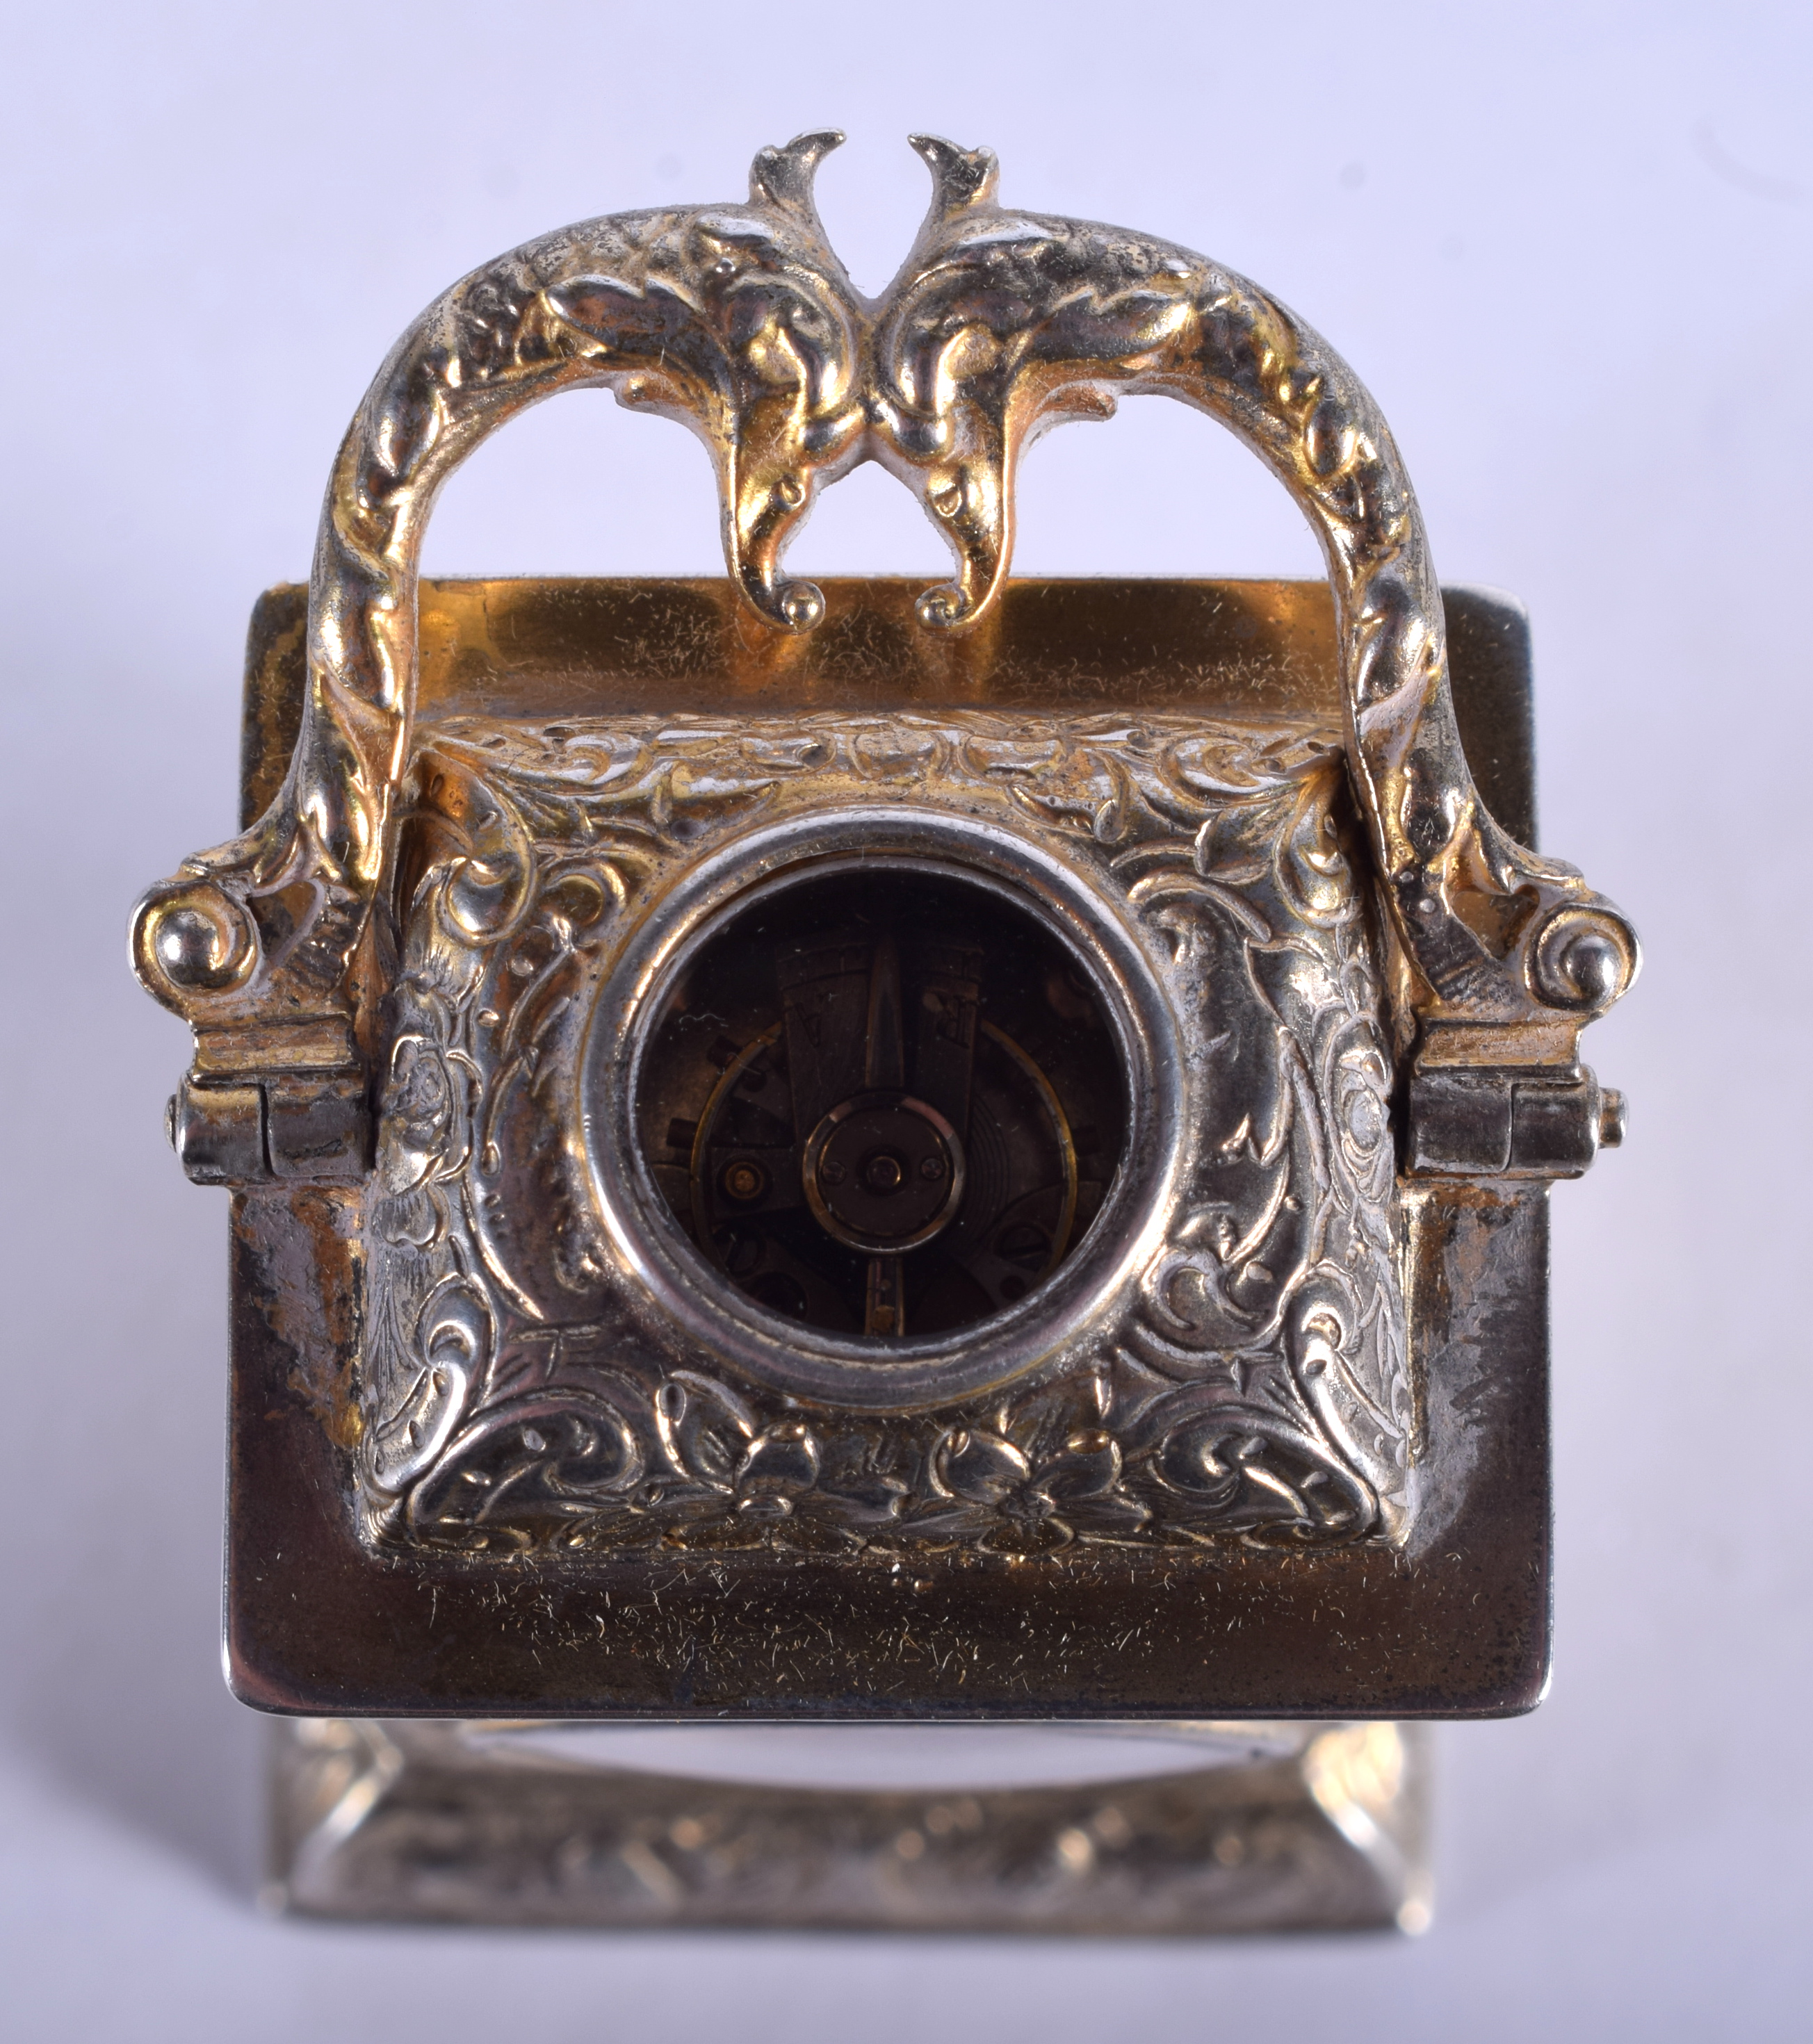 A LOVELY ANTIQUE MINIATURE TRAVELLING SILVER GILT CLOCK decorated with foliage and vines. 8.75 cm hi - Image 6 of 8